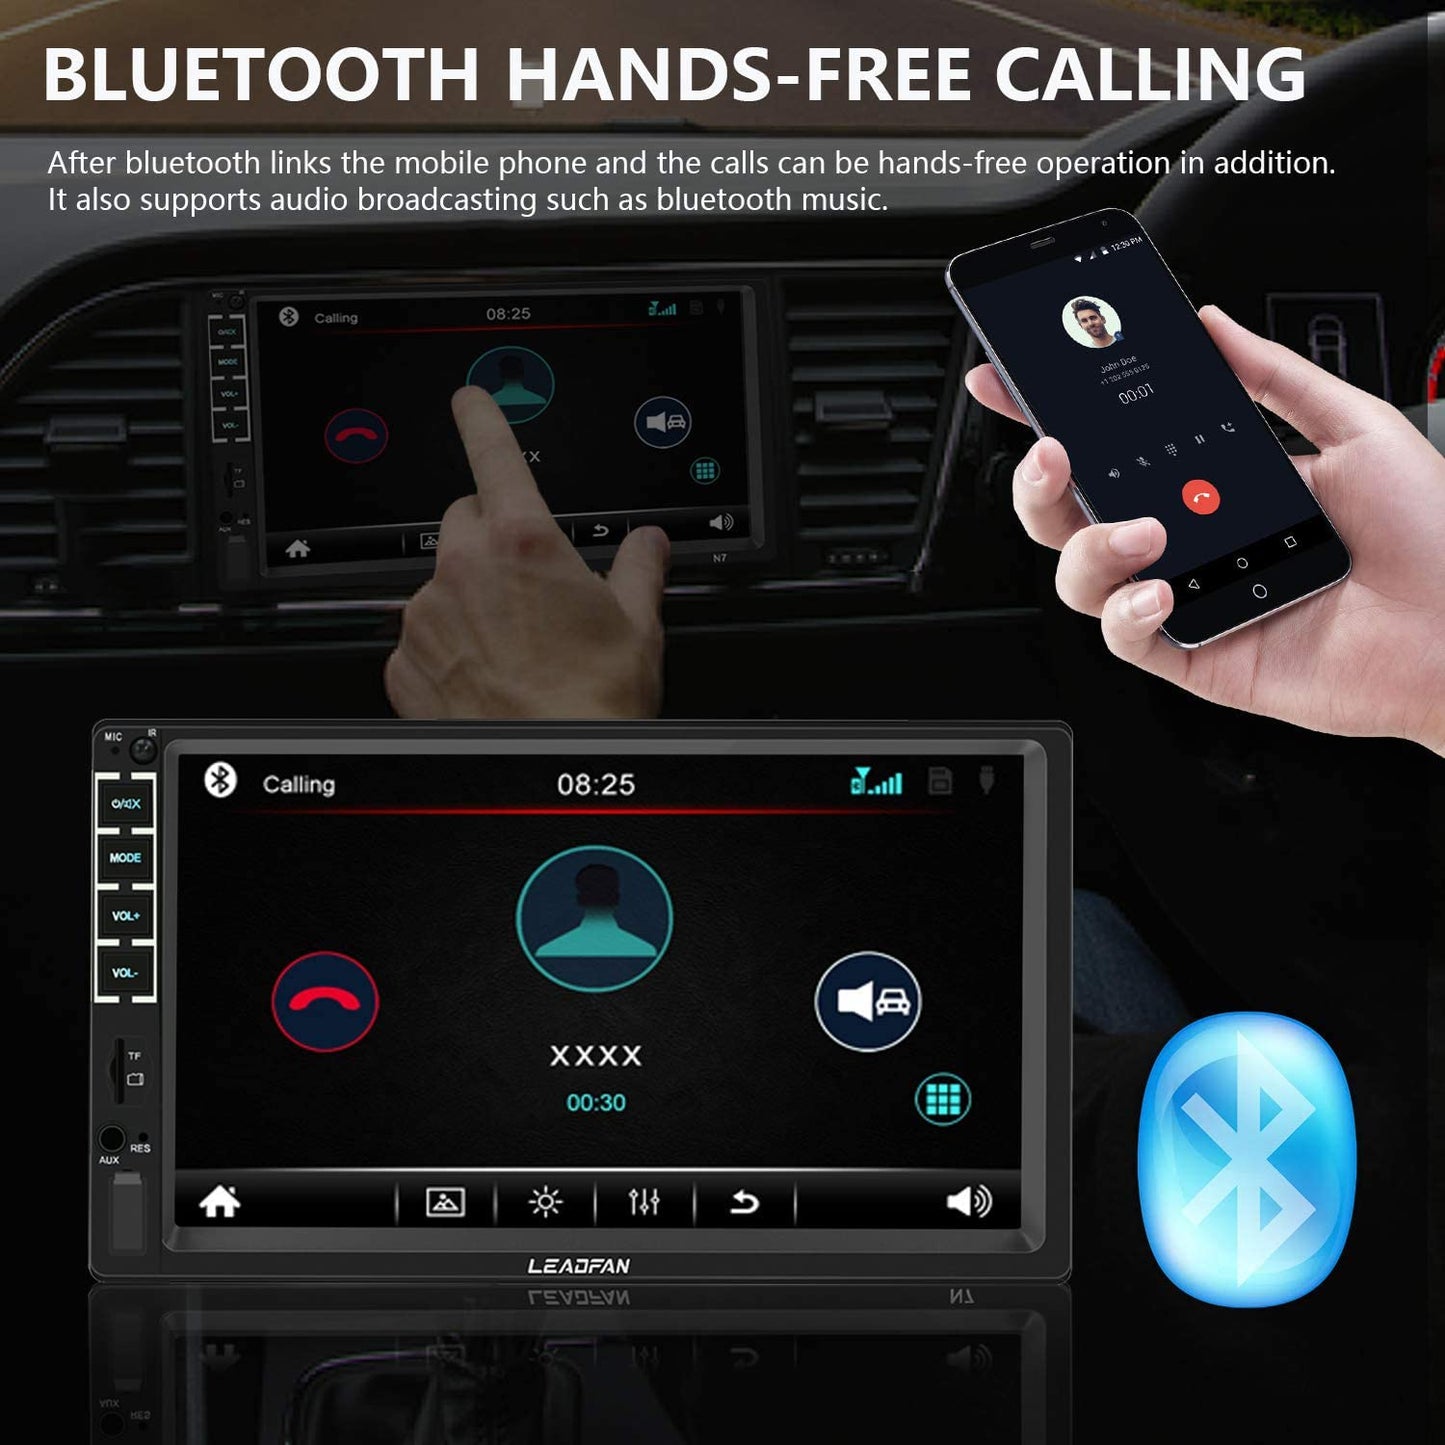 7" Car Stereo Double Din Touch Screen Car Radio Audio Receiver FM Radio Bluetooth Video Remote Control MP5/4/3 Player Android iPhone Mirror Link USB/SD/AUX Hands Free Calling with Camera